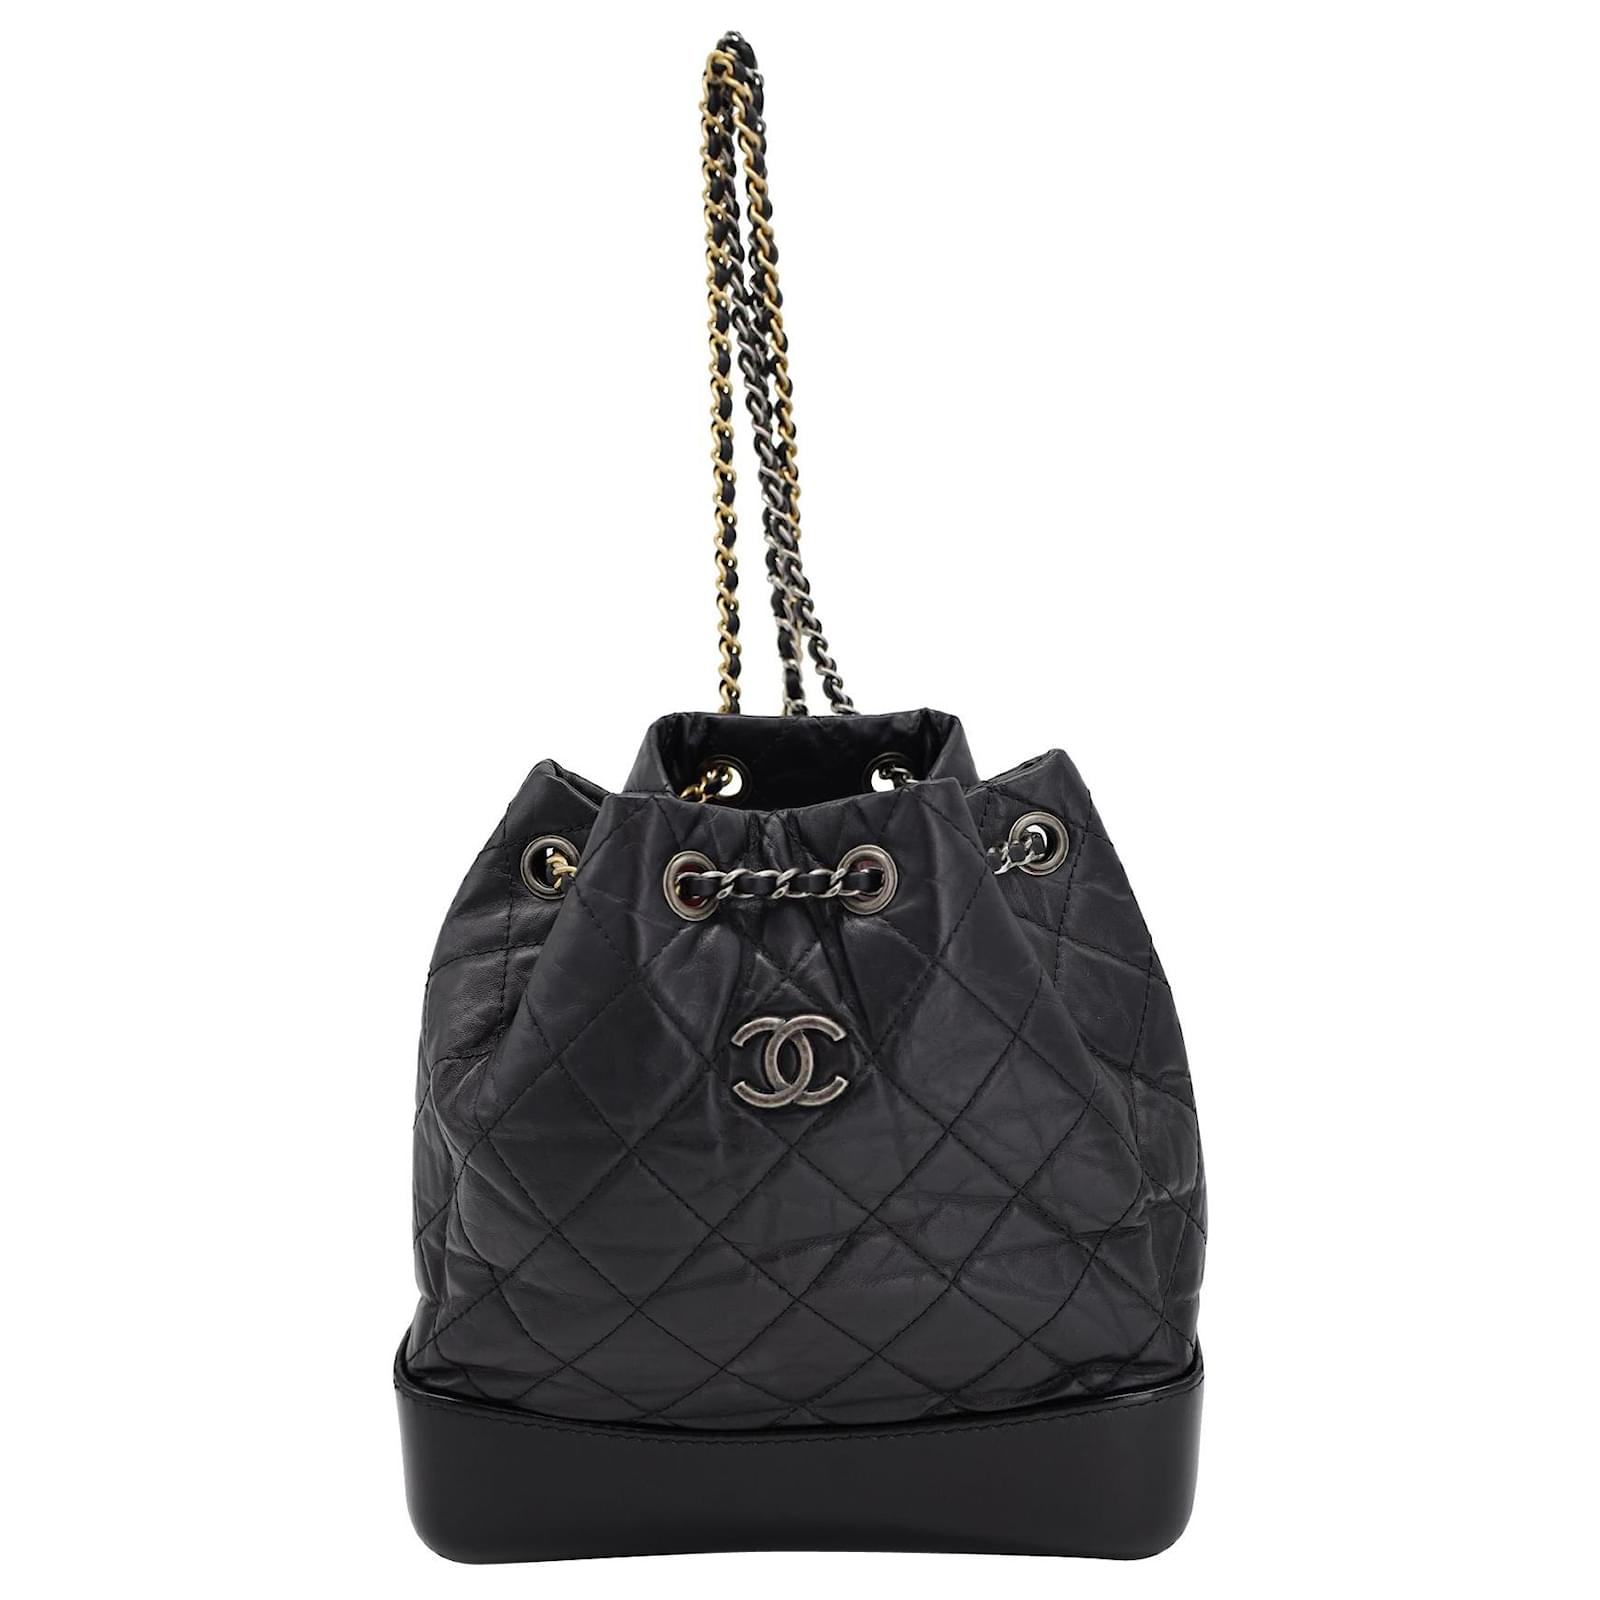 Backpacks Chanel Chanel Quilted Gabrielle Backpack in Black Aged Calfskin Leather